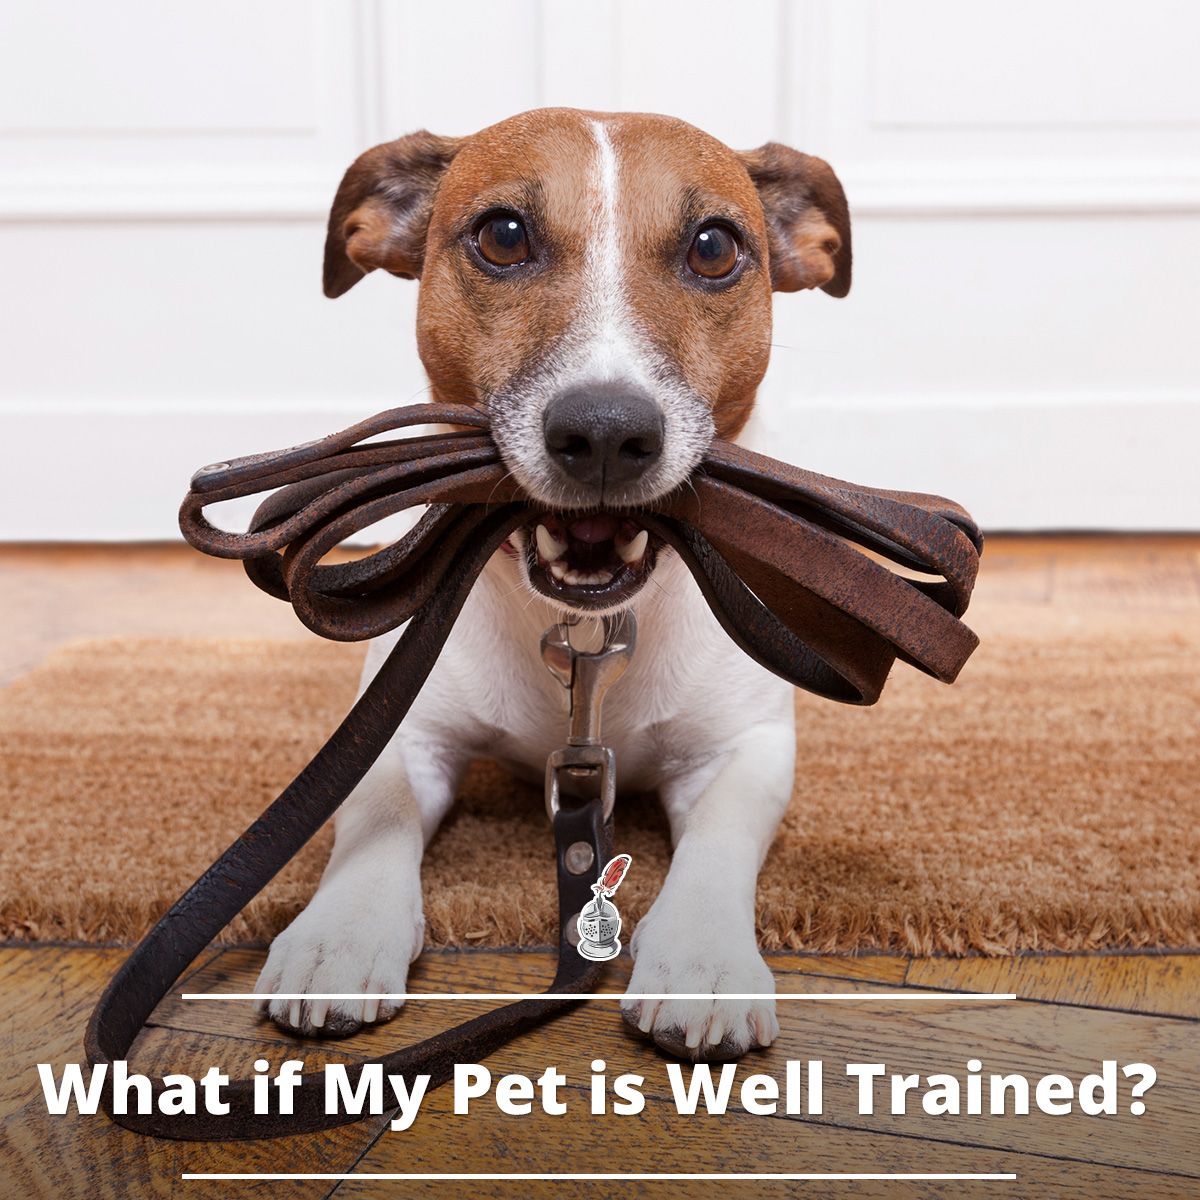 What if My Pet is Well Trained?